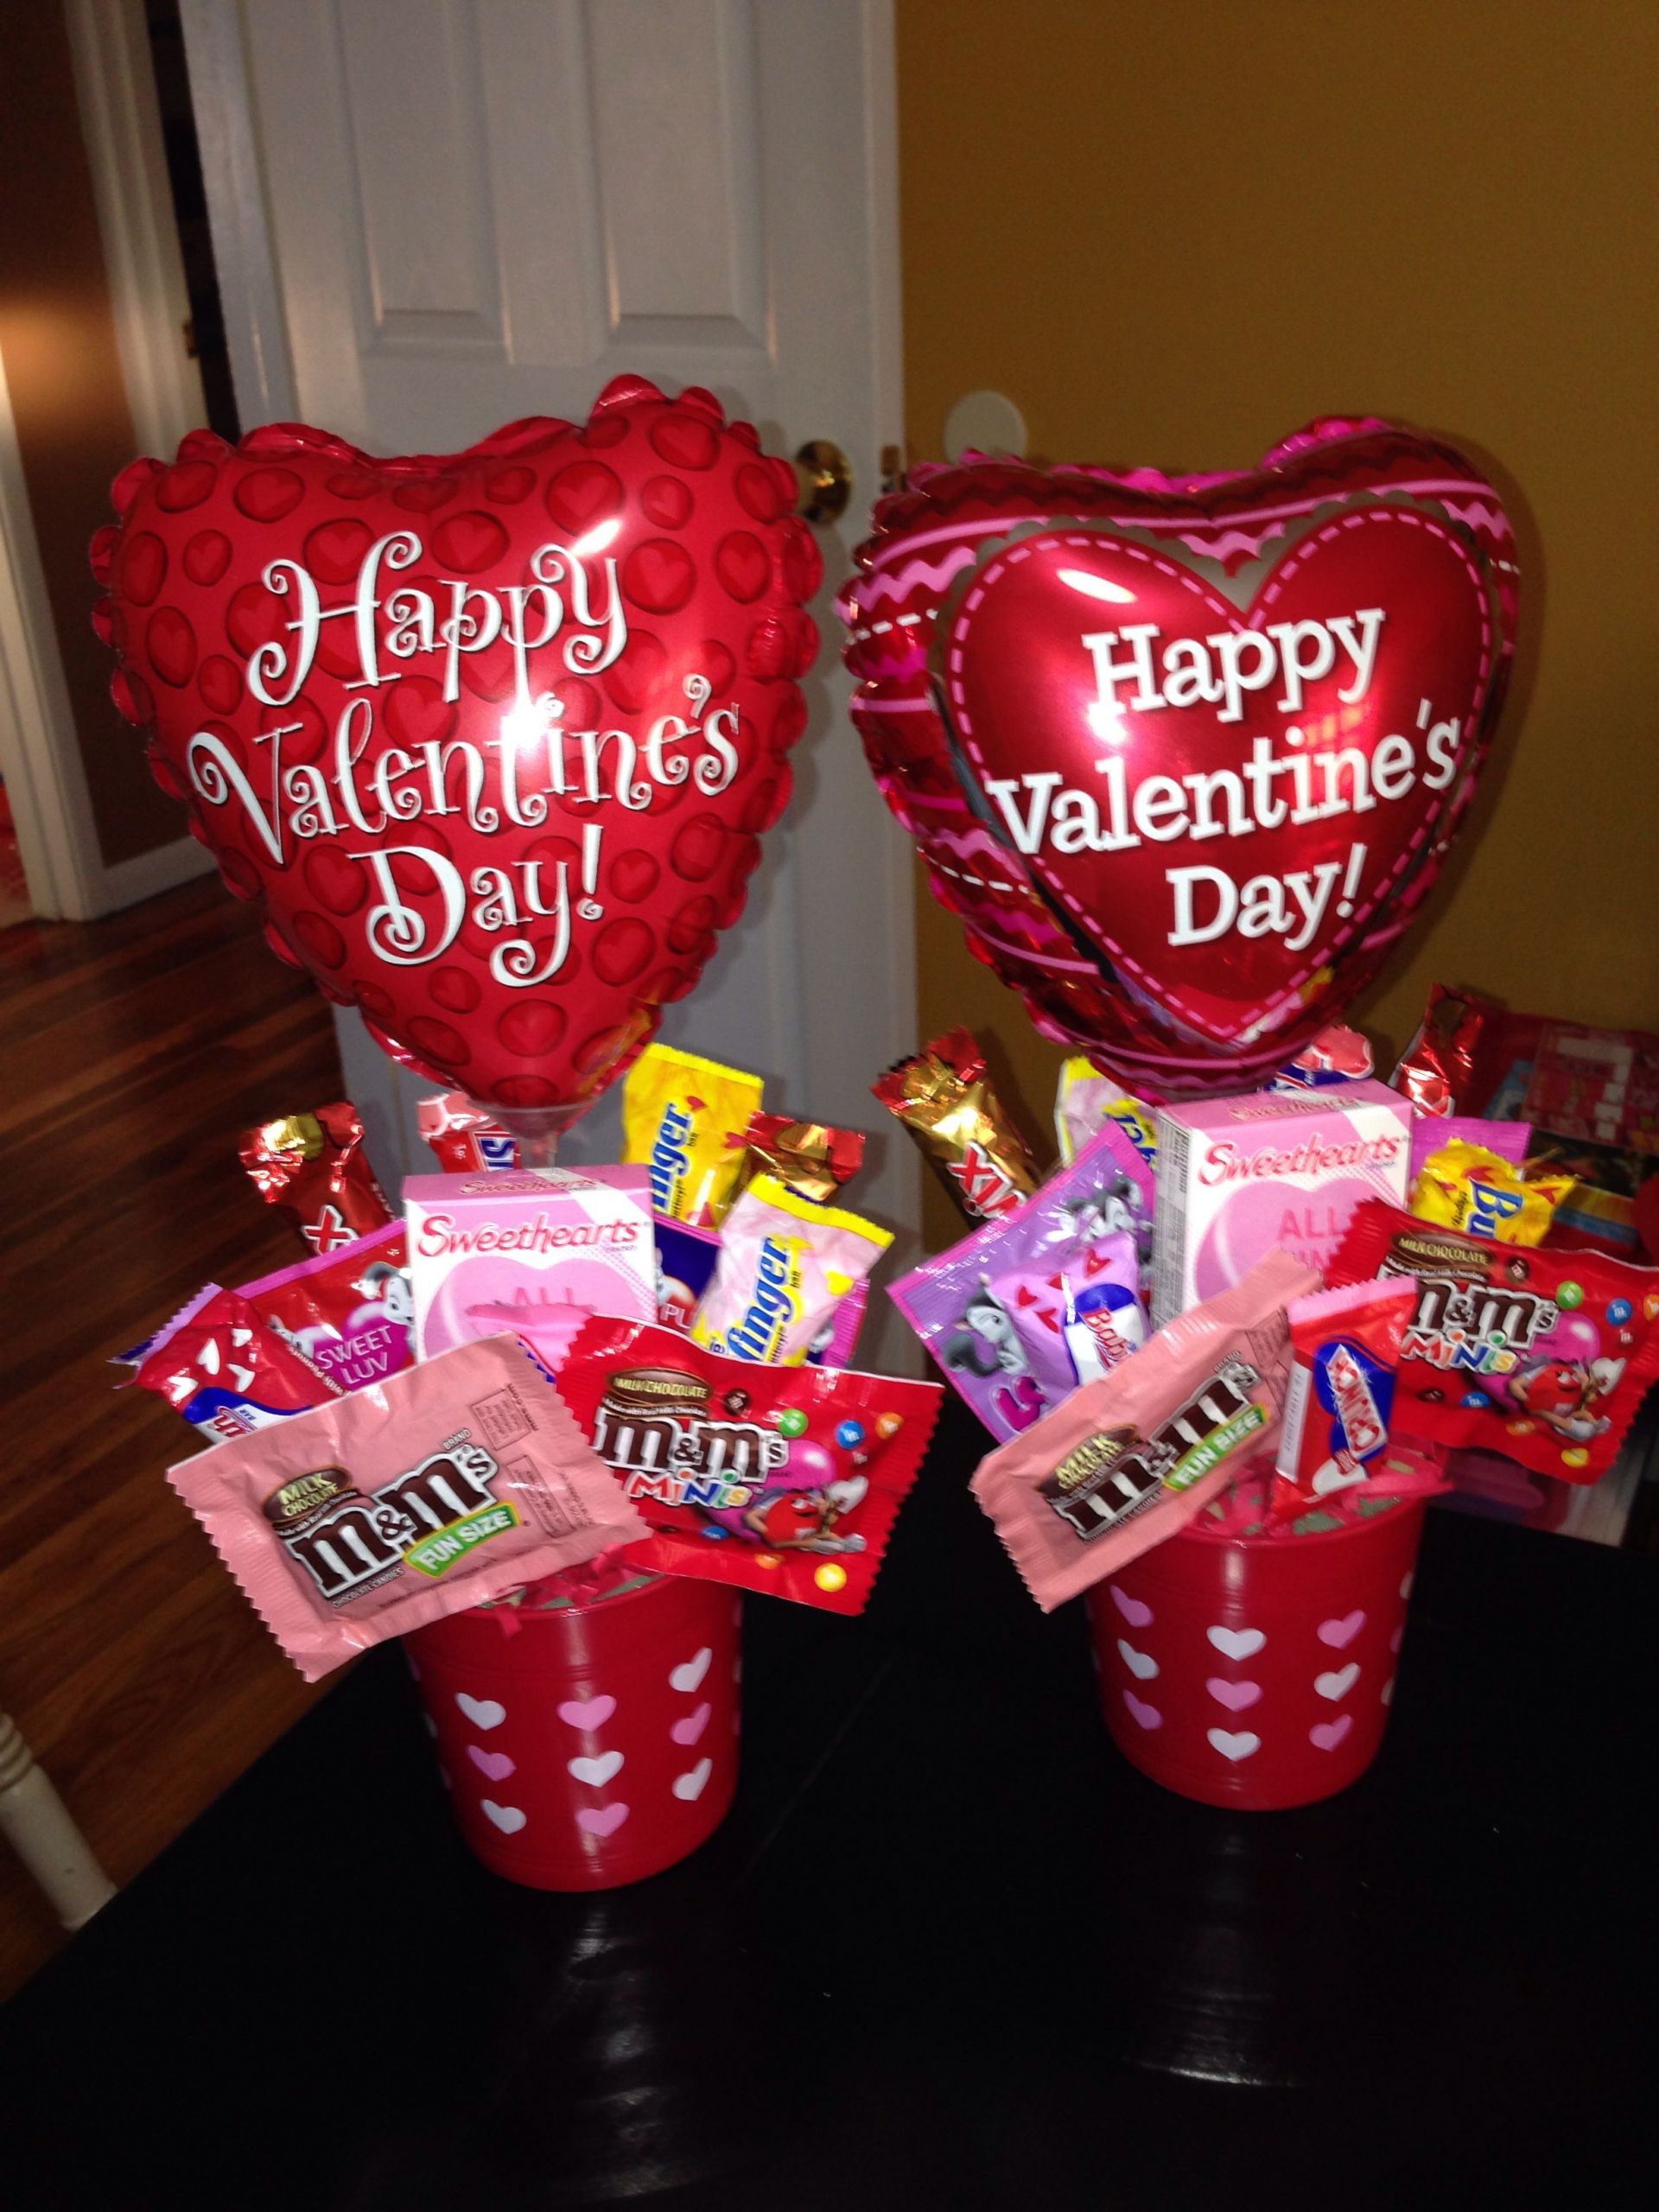 Valentines Day Small Gift Ideas
 Small valentines bouquets Candy bouquets